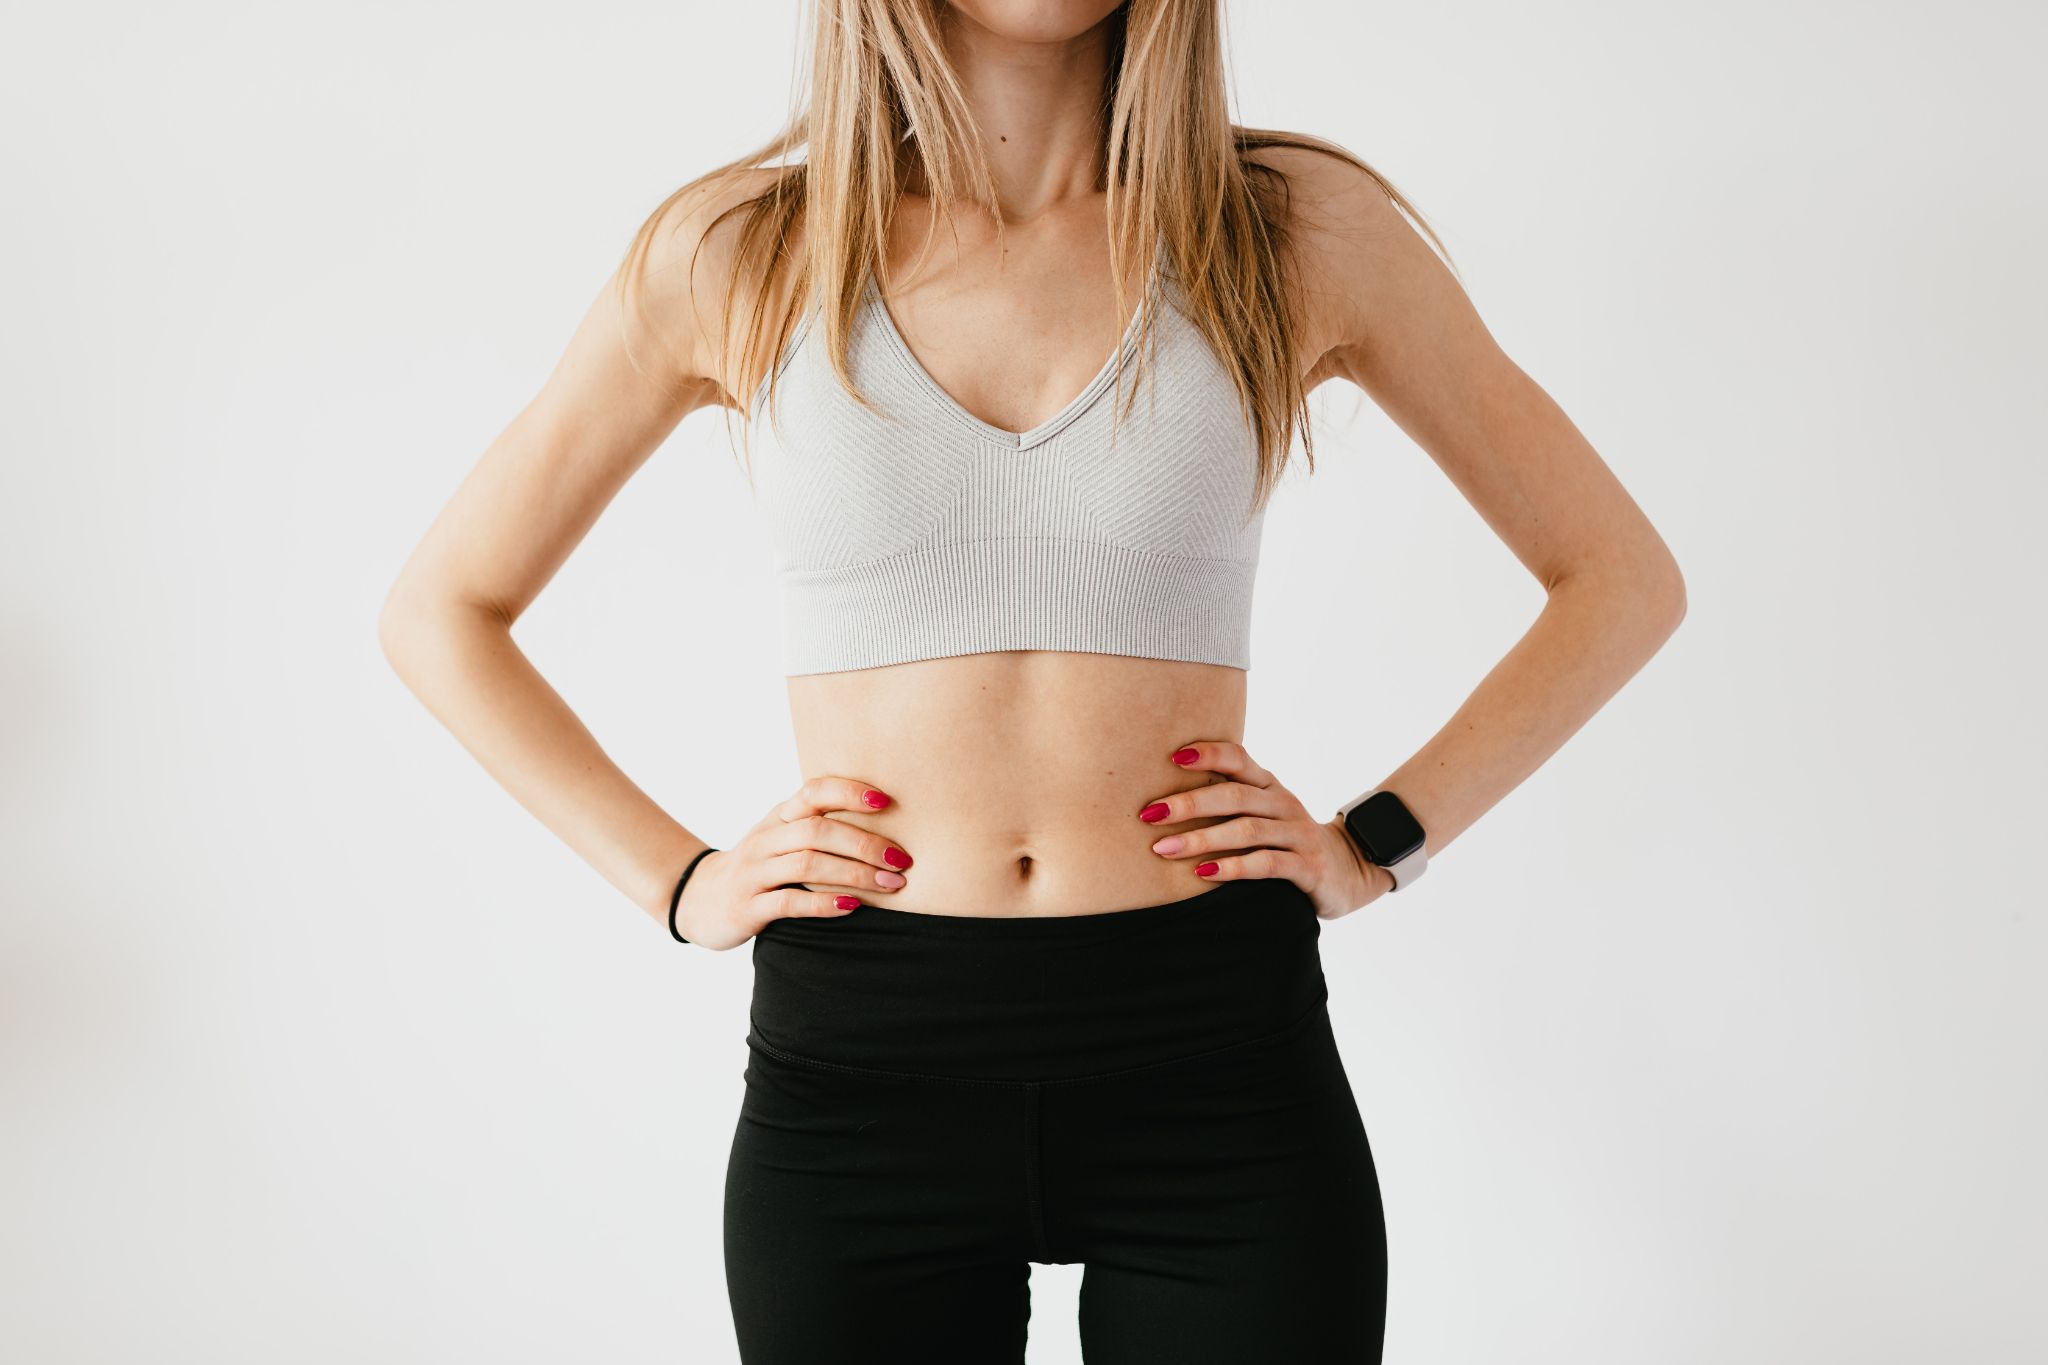 How to Get the Best Sports Bra for Workout